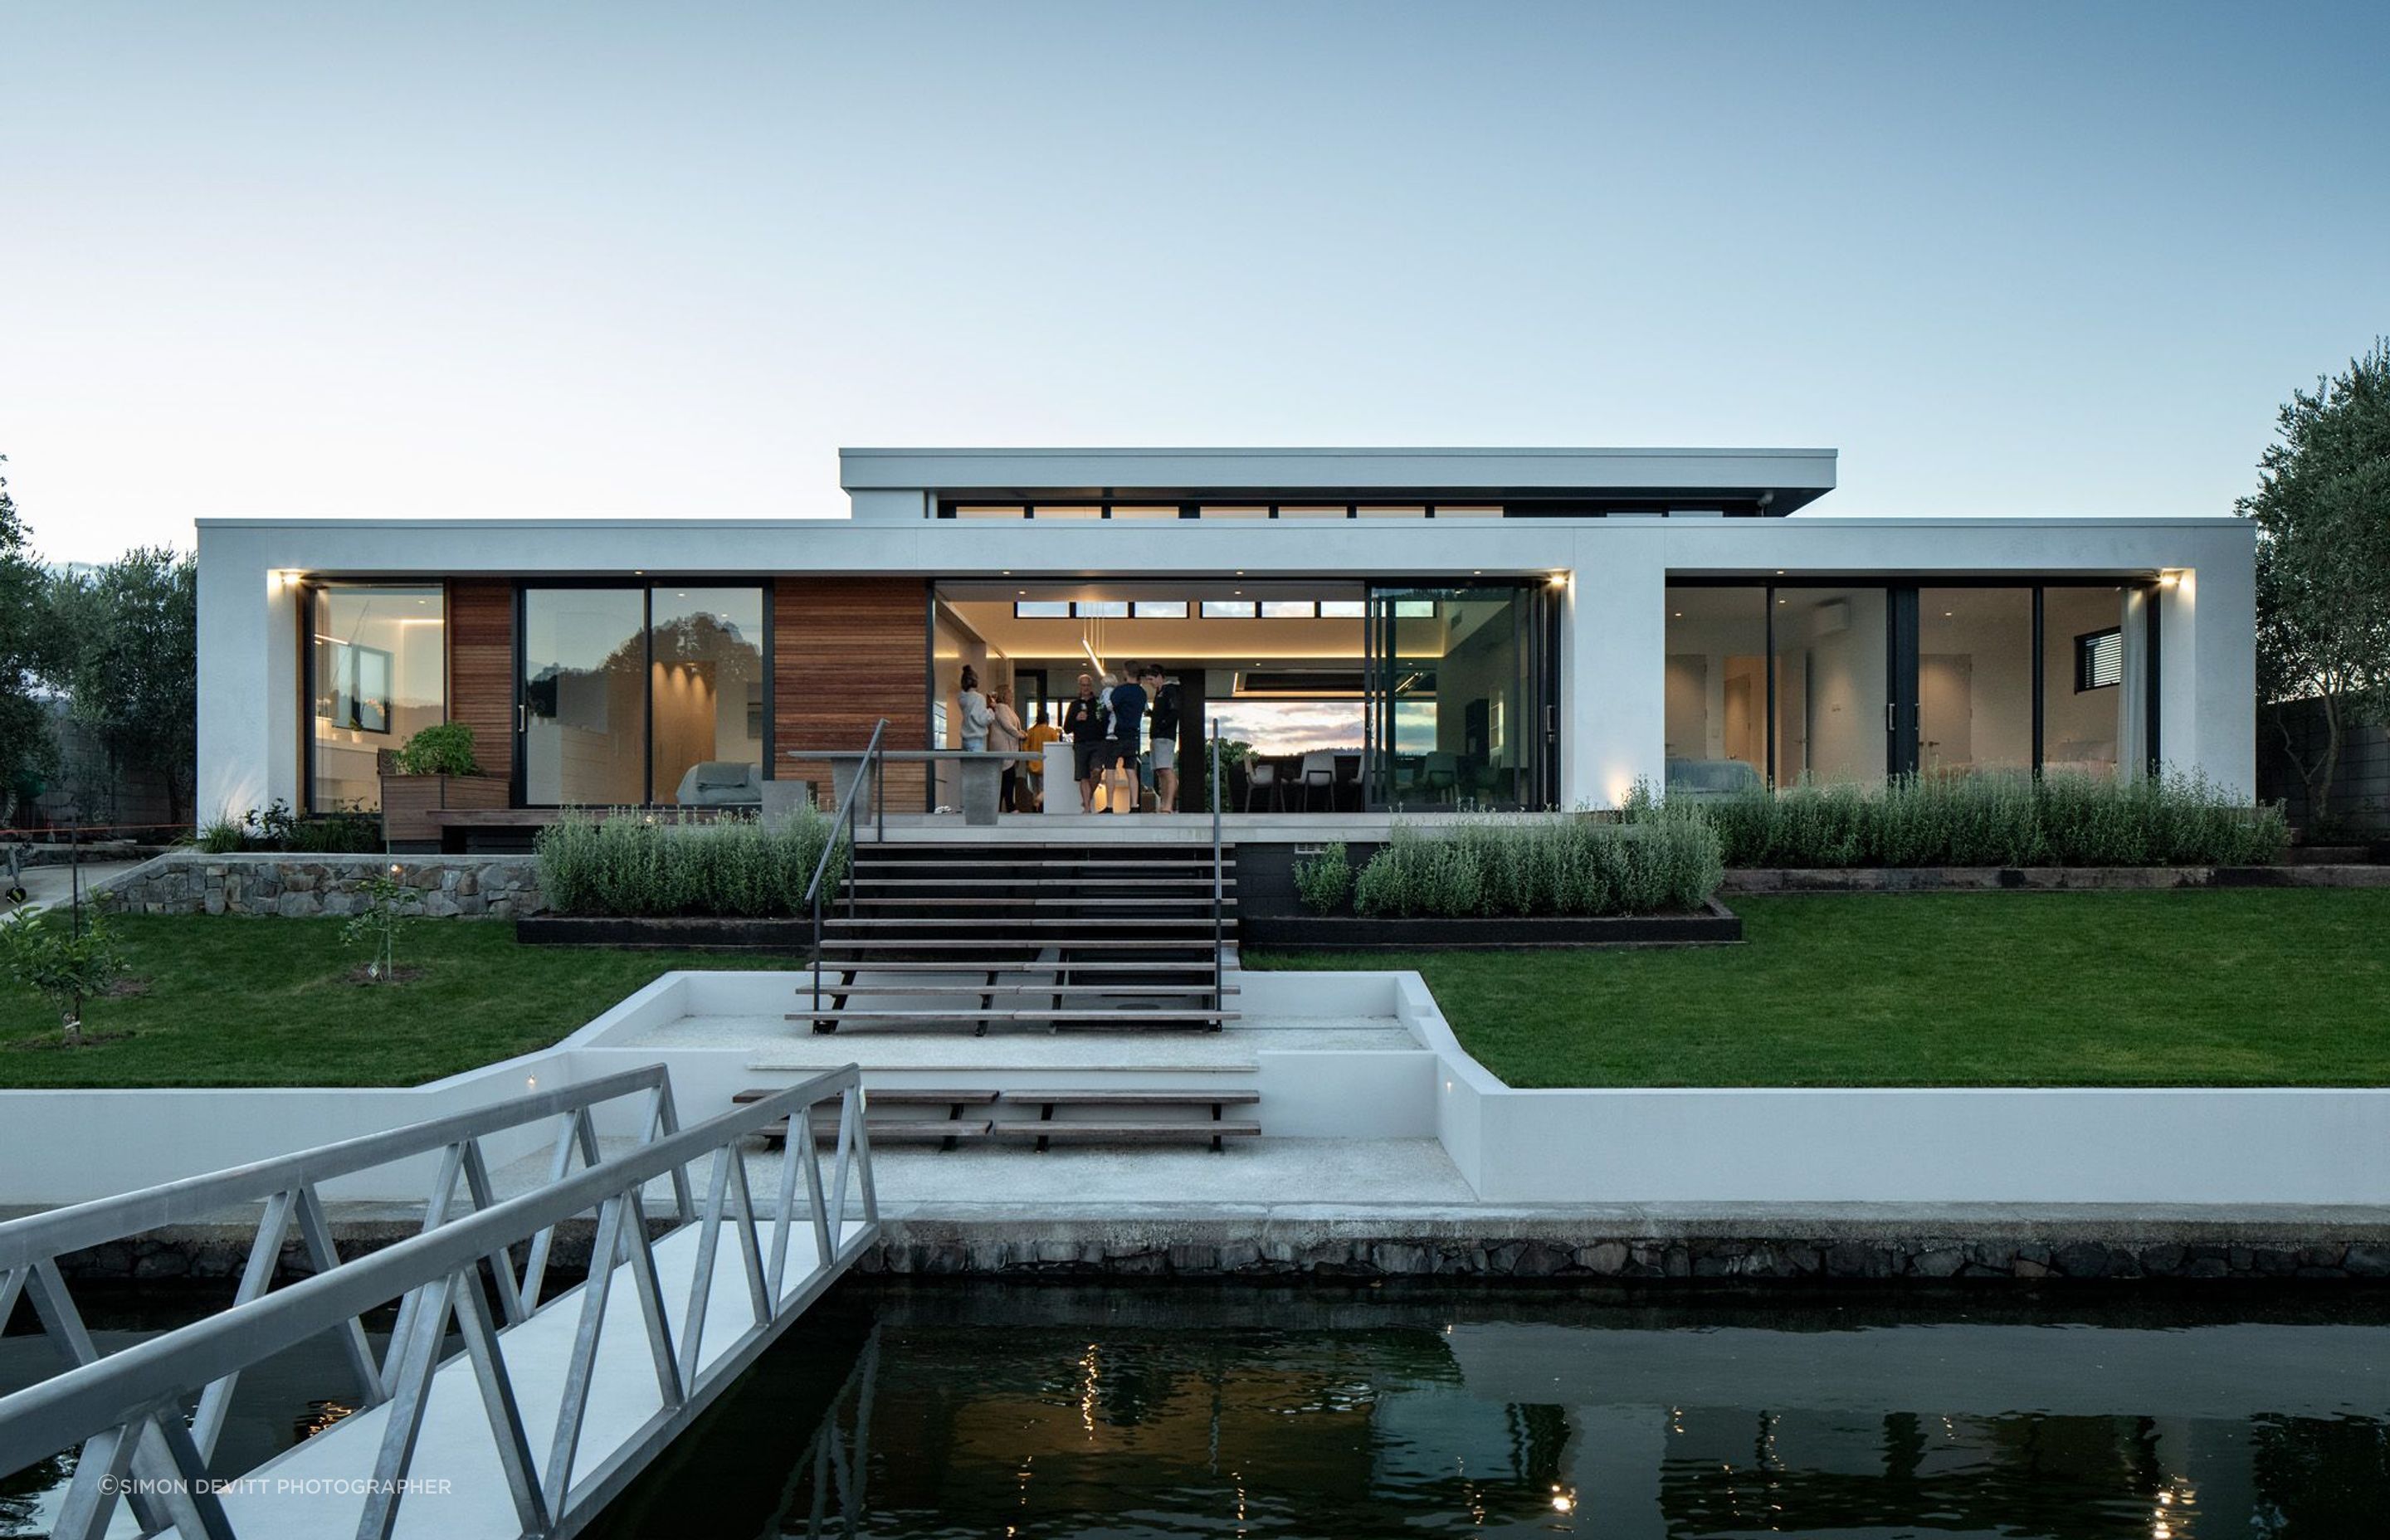 The view of Pauanui Vice from the boat dock showcases its simple modernist forms.